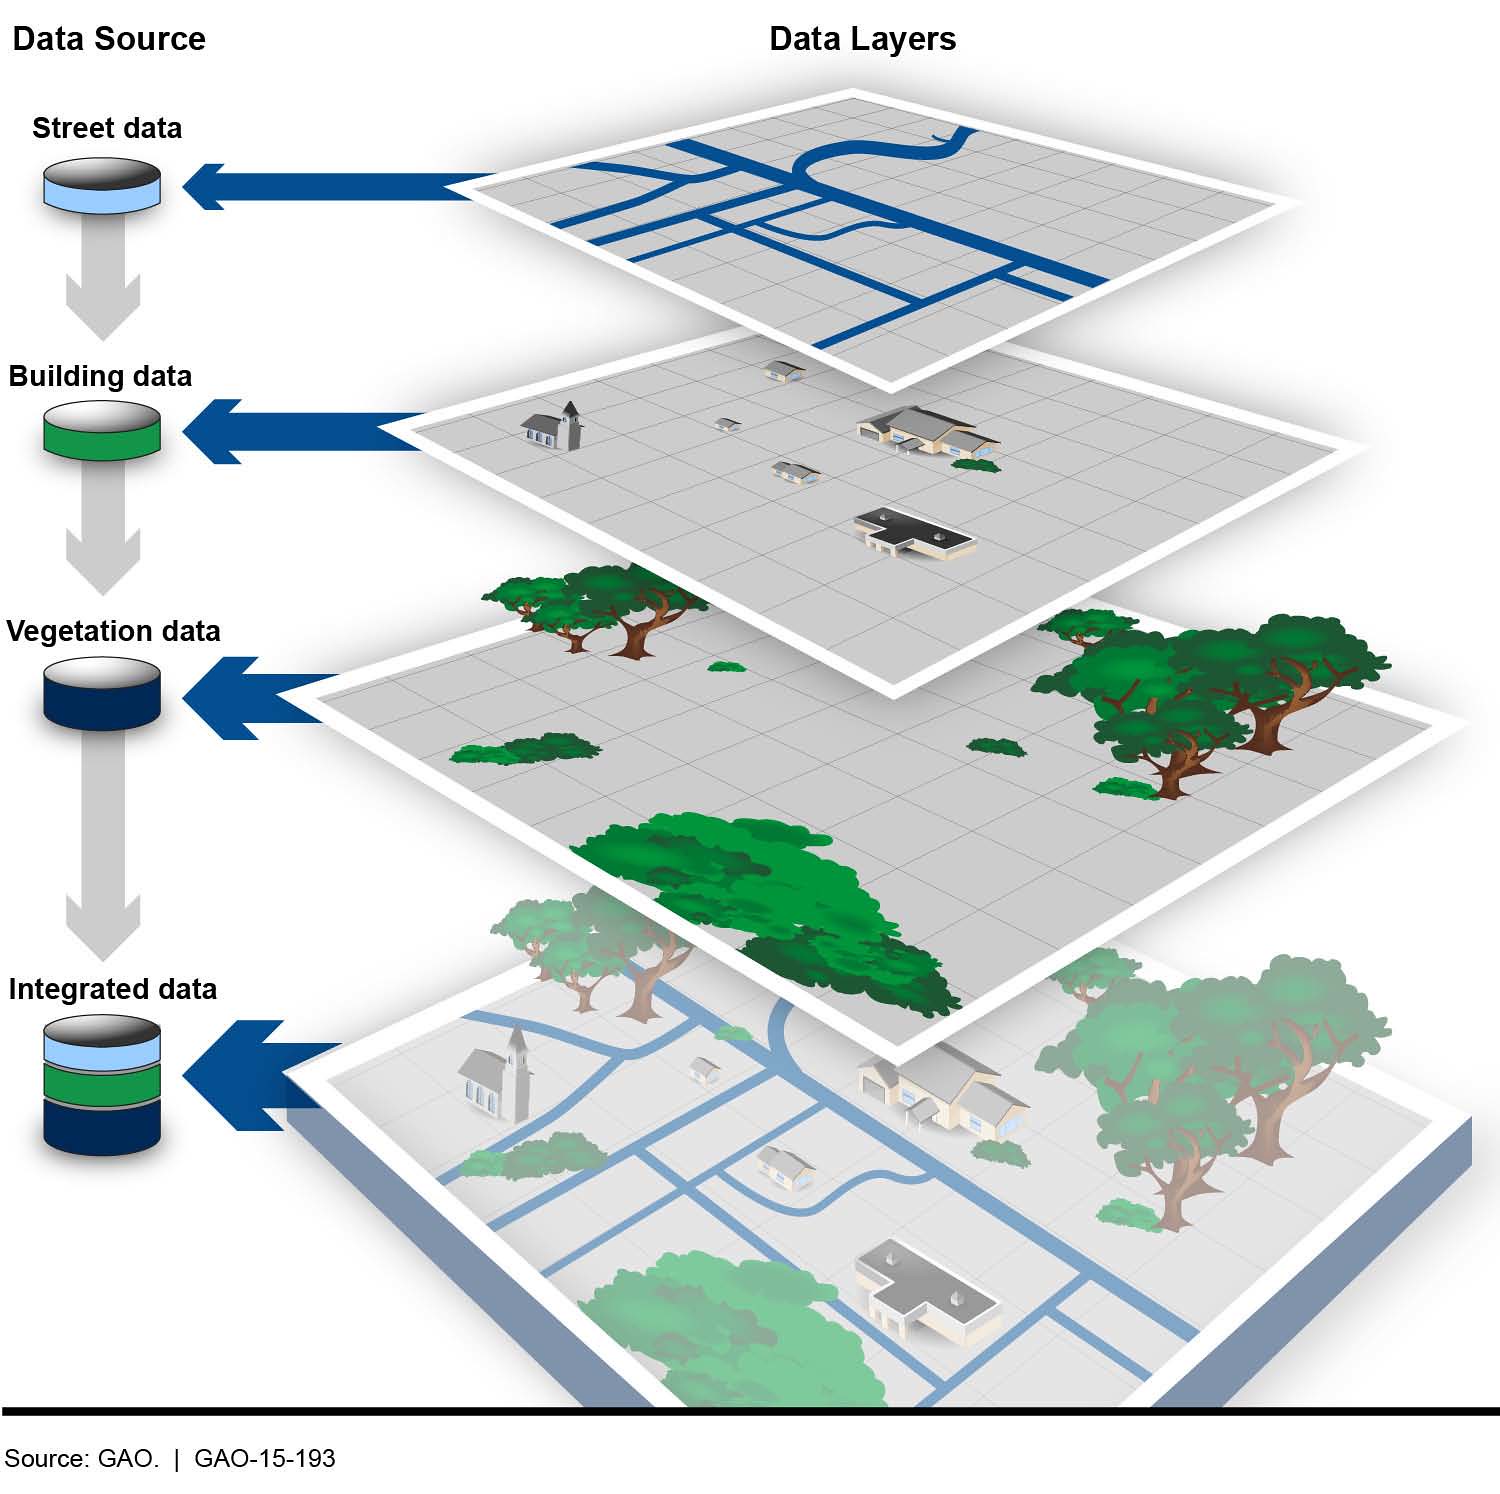 Diagram showing GIS layers, from top to bottom: Street data, Building Data, Vegetation Data, Integrated Data.